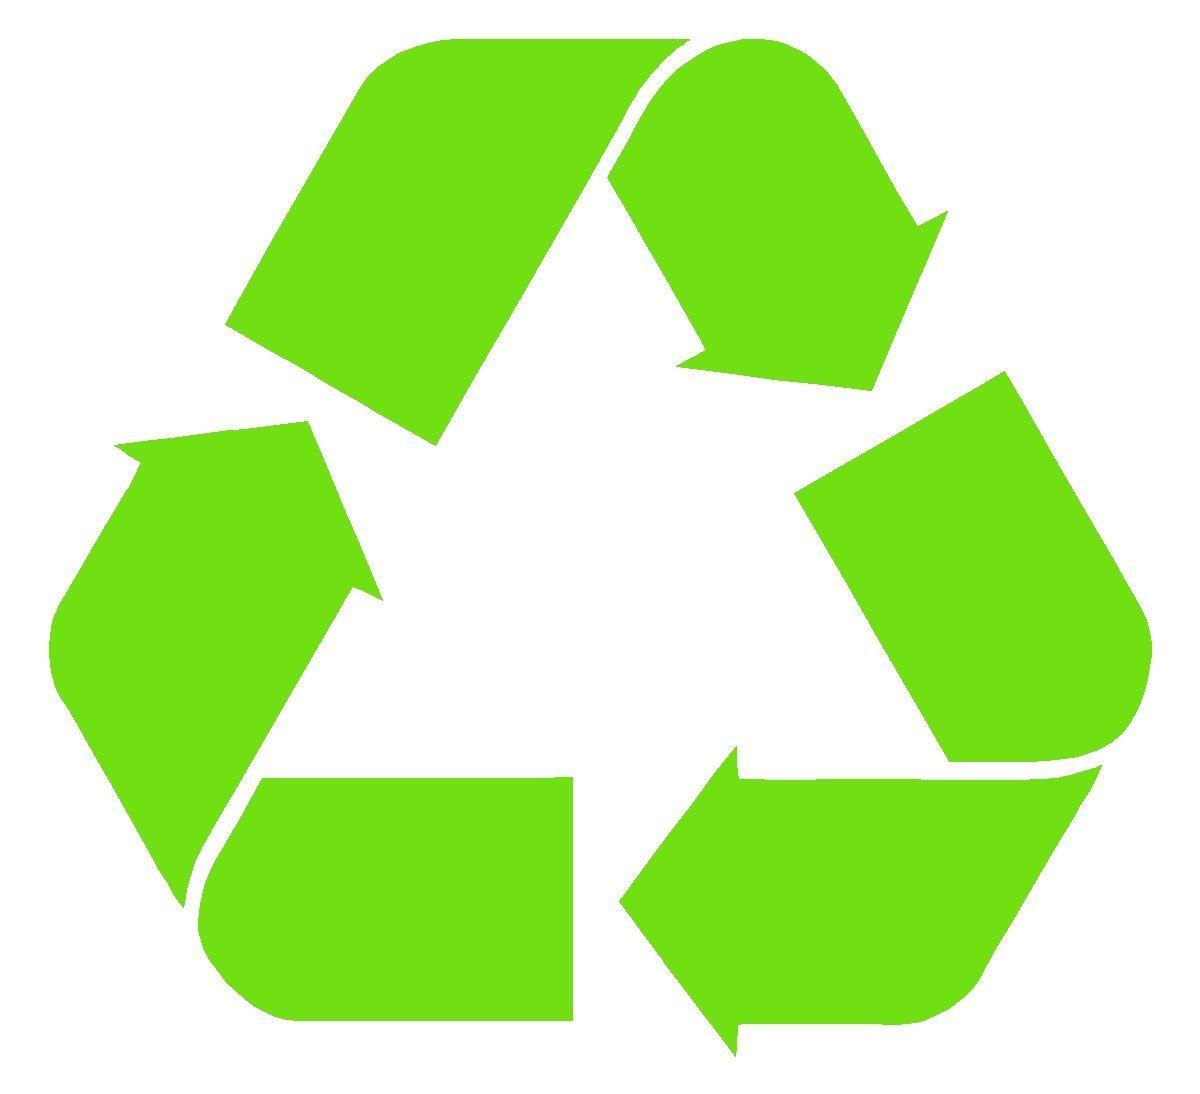 Bin Logo - Sassy Stickers Recycle Logo Lime Green 5 Sticker Go Earth Vinyl Recycling Can Bin Decal